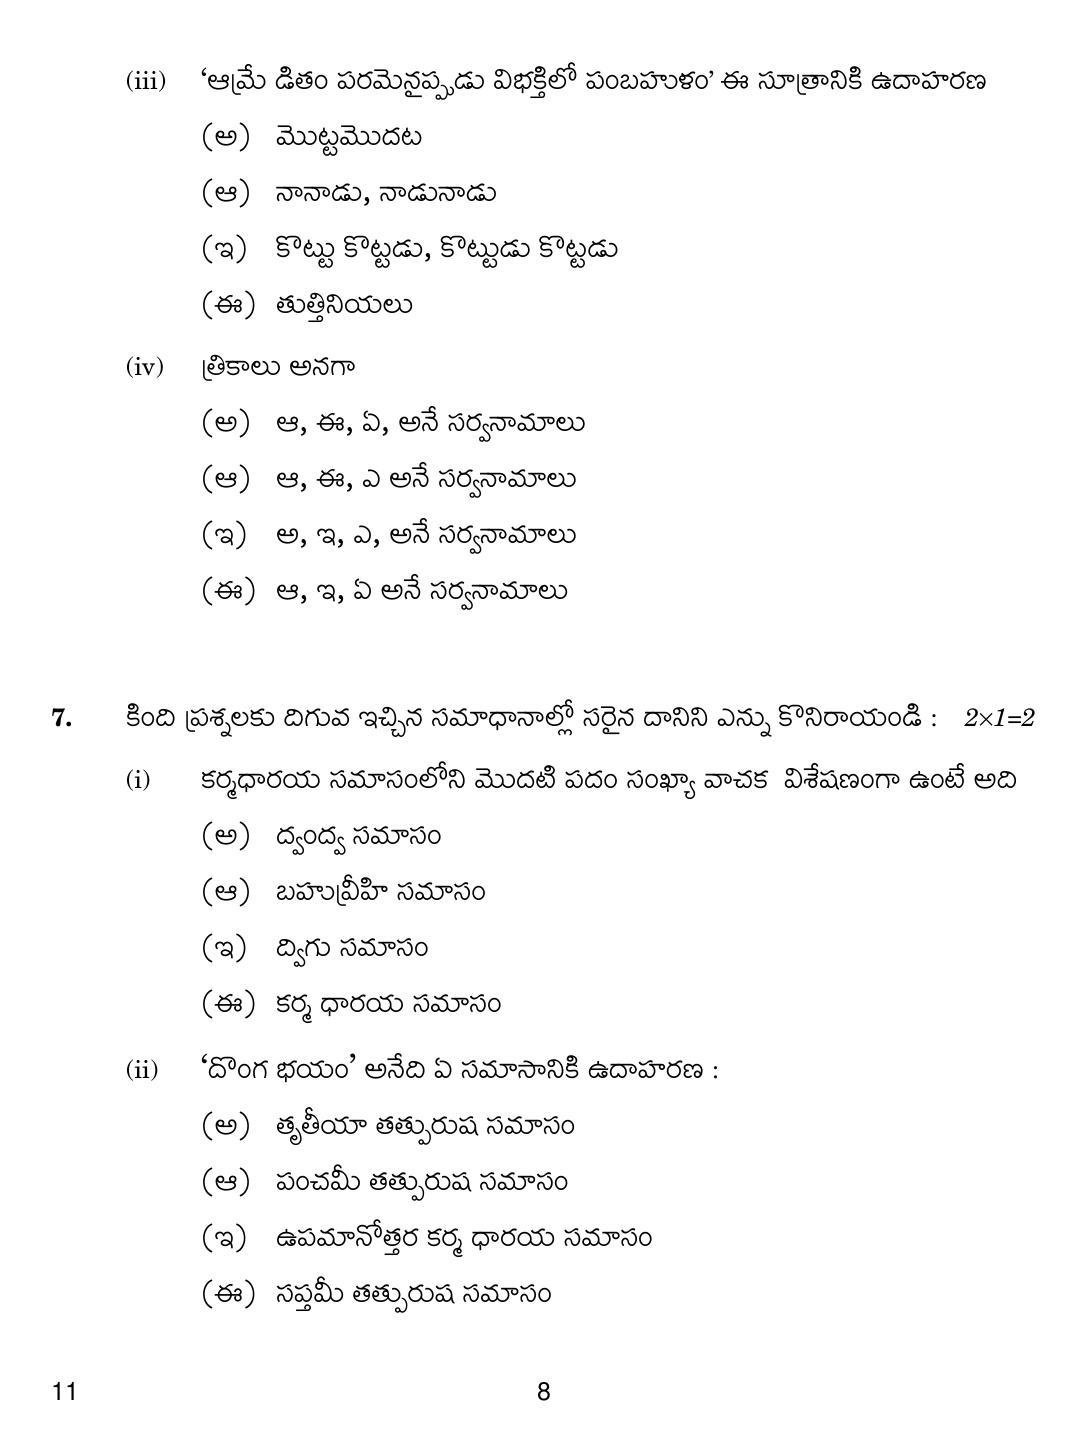 CBSE Class 10 11 Telug 2019 Question Paper - Page 8